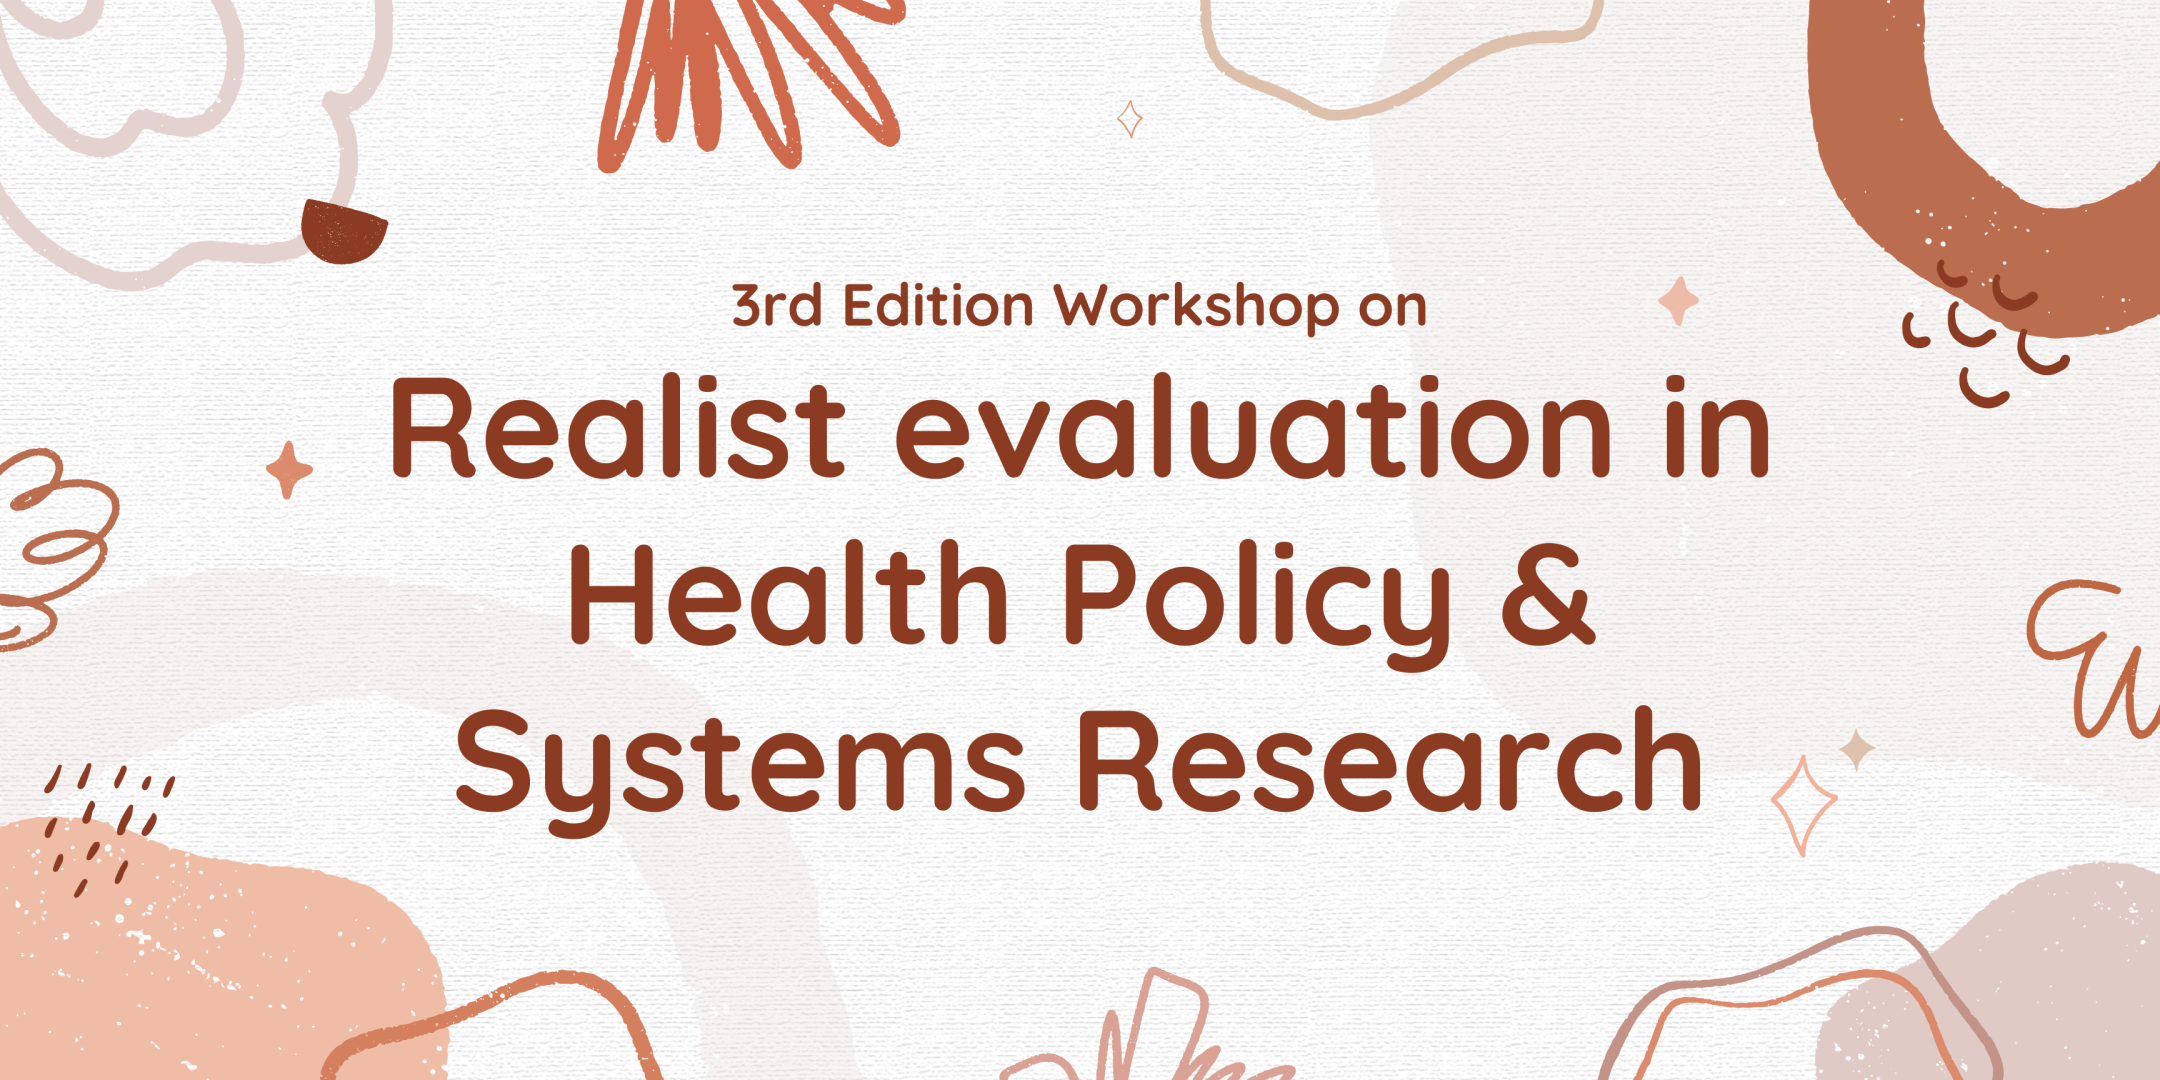 Realist evaluation in Health Policy & Systems Research 2022